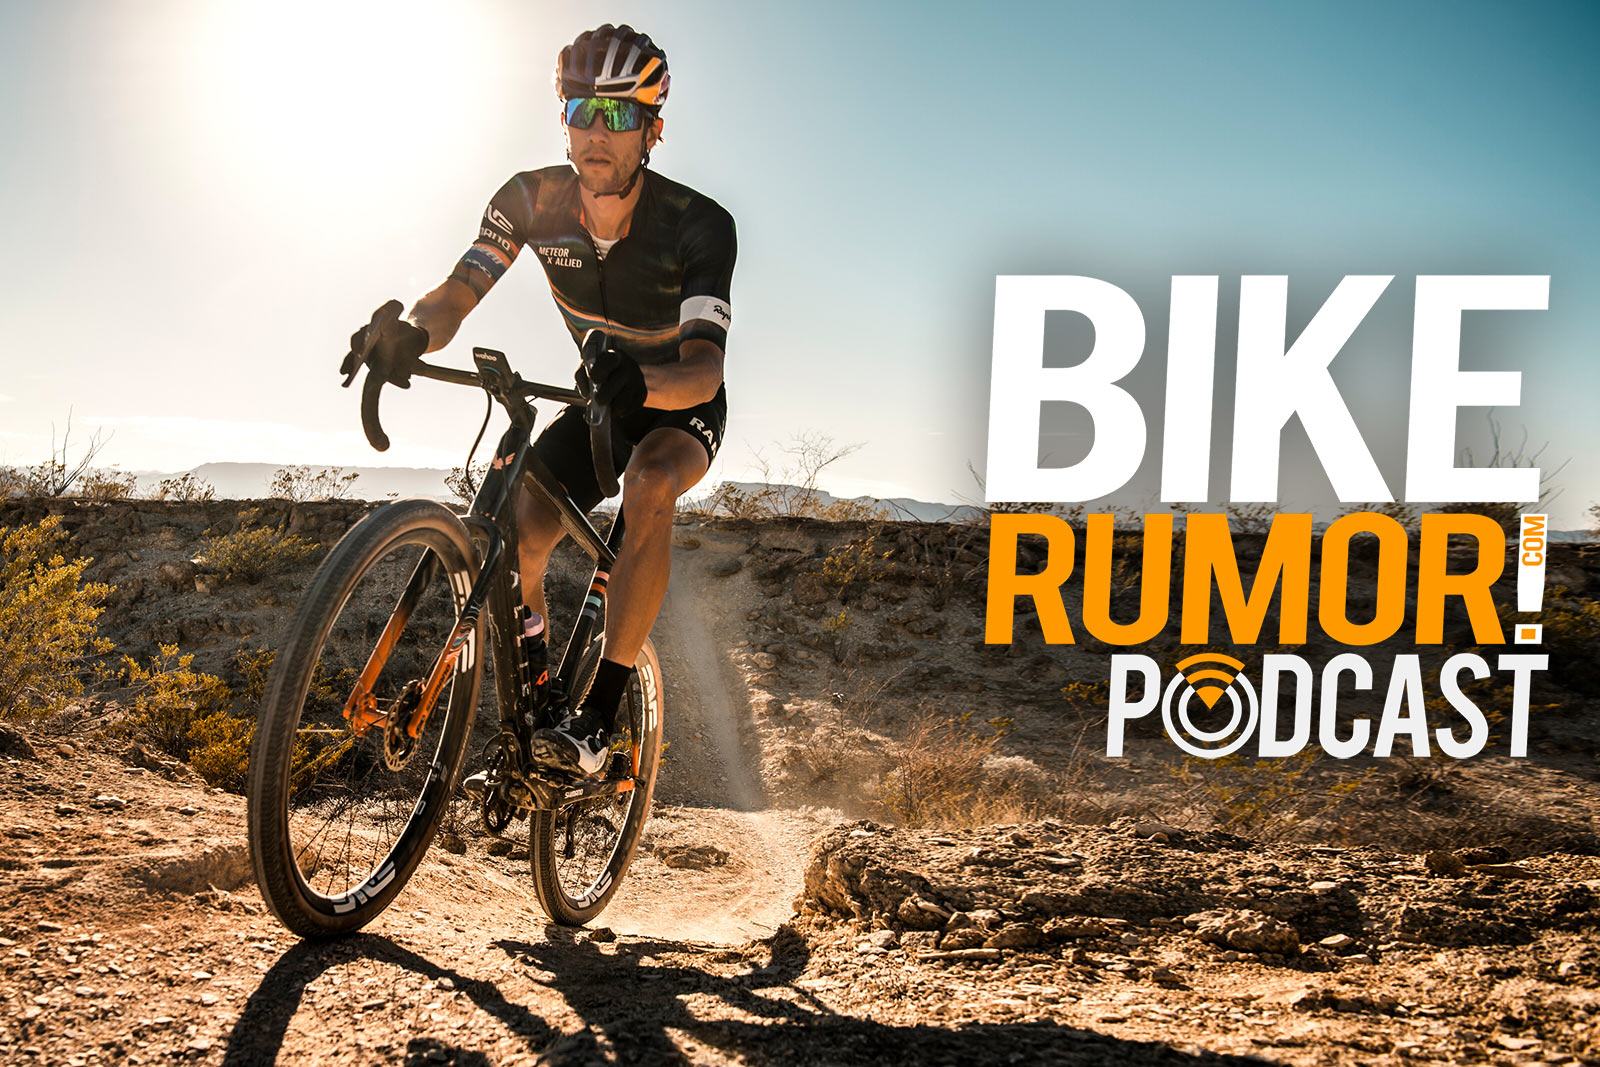 bikerumor podcast cover interview with colin strickland gravel racer